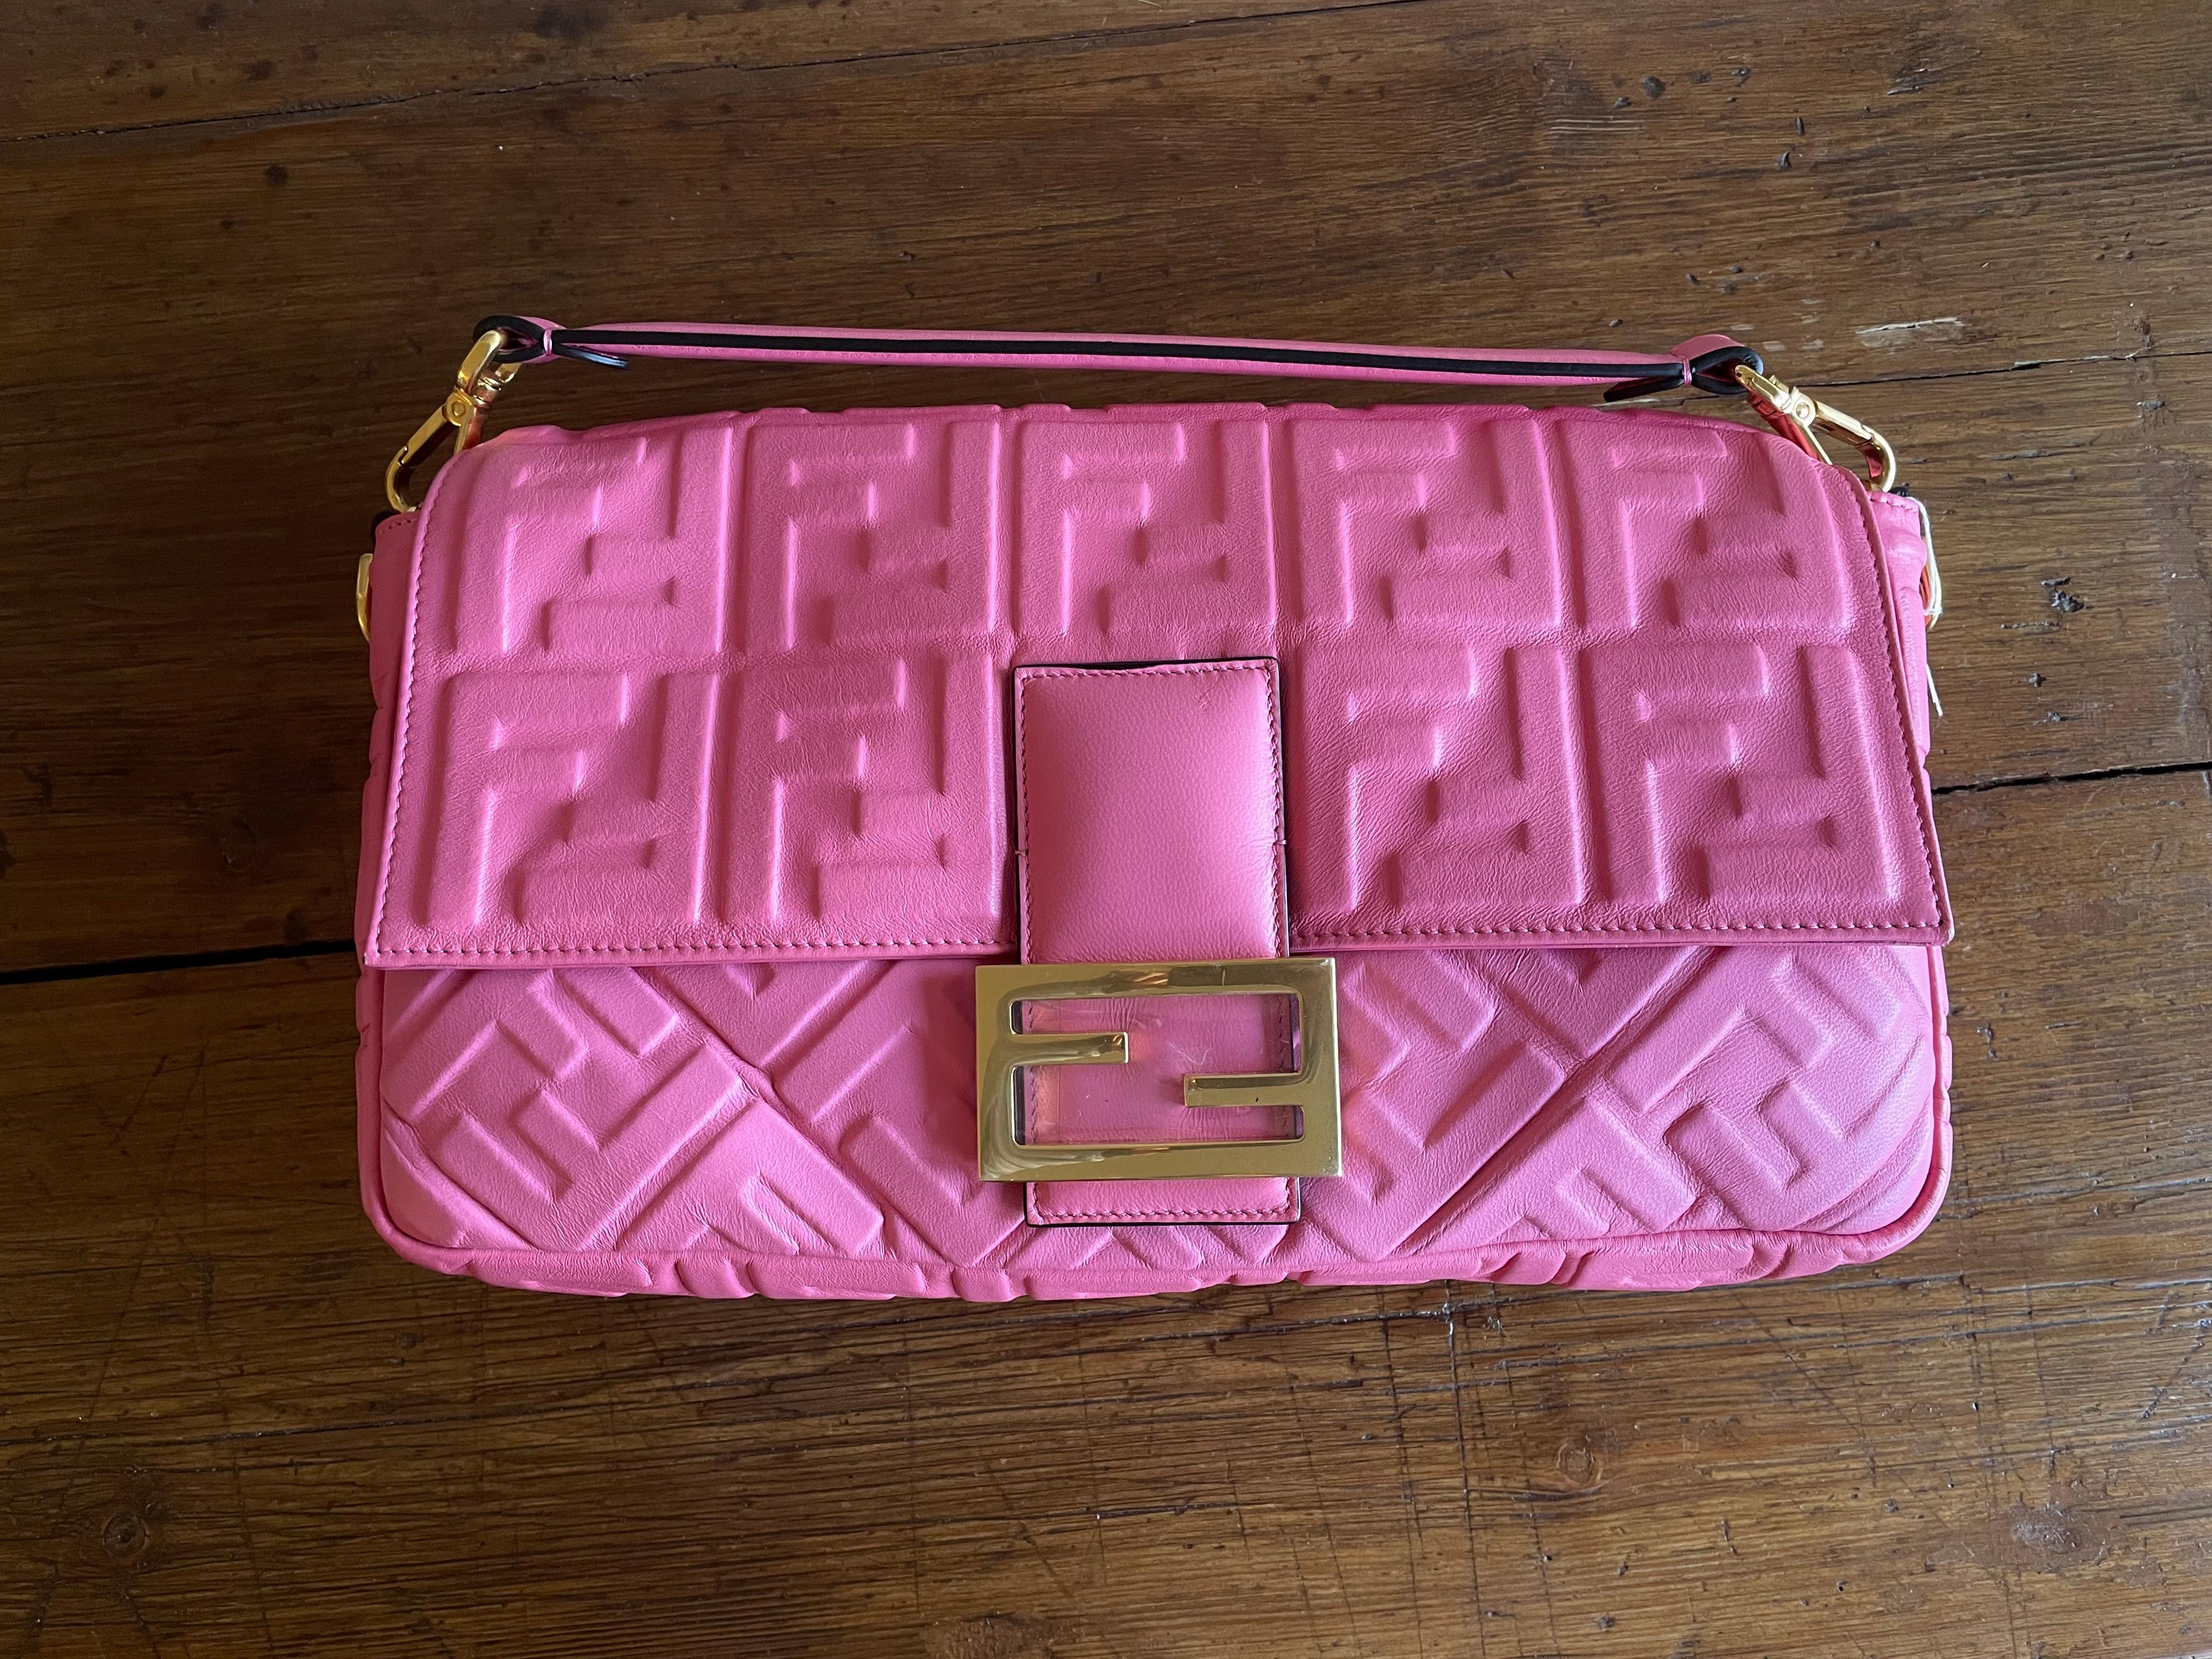 New Fendi baguette bag in pink nappa leather. 1